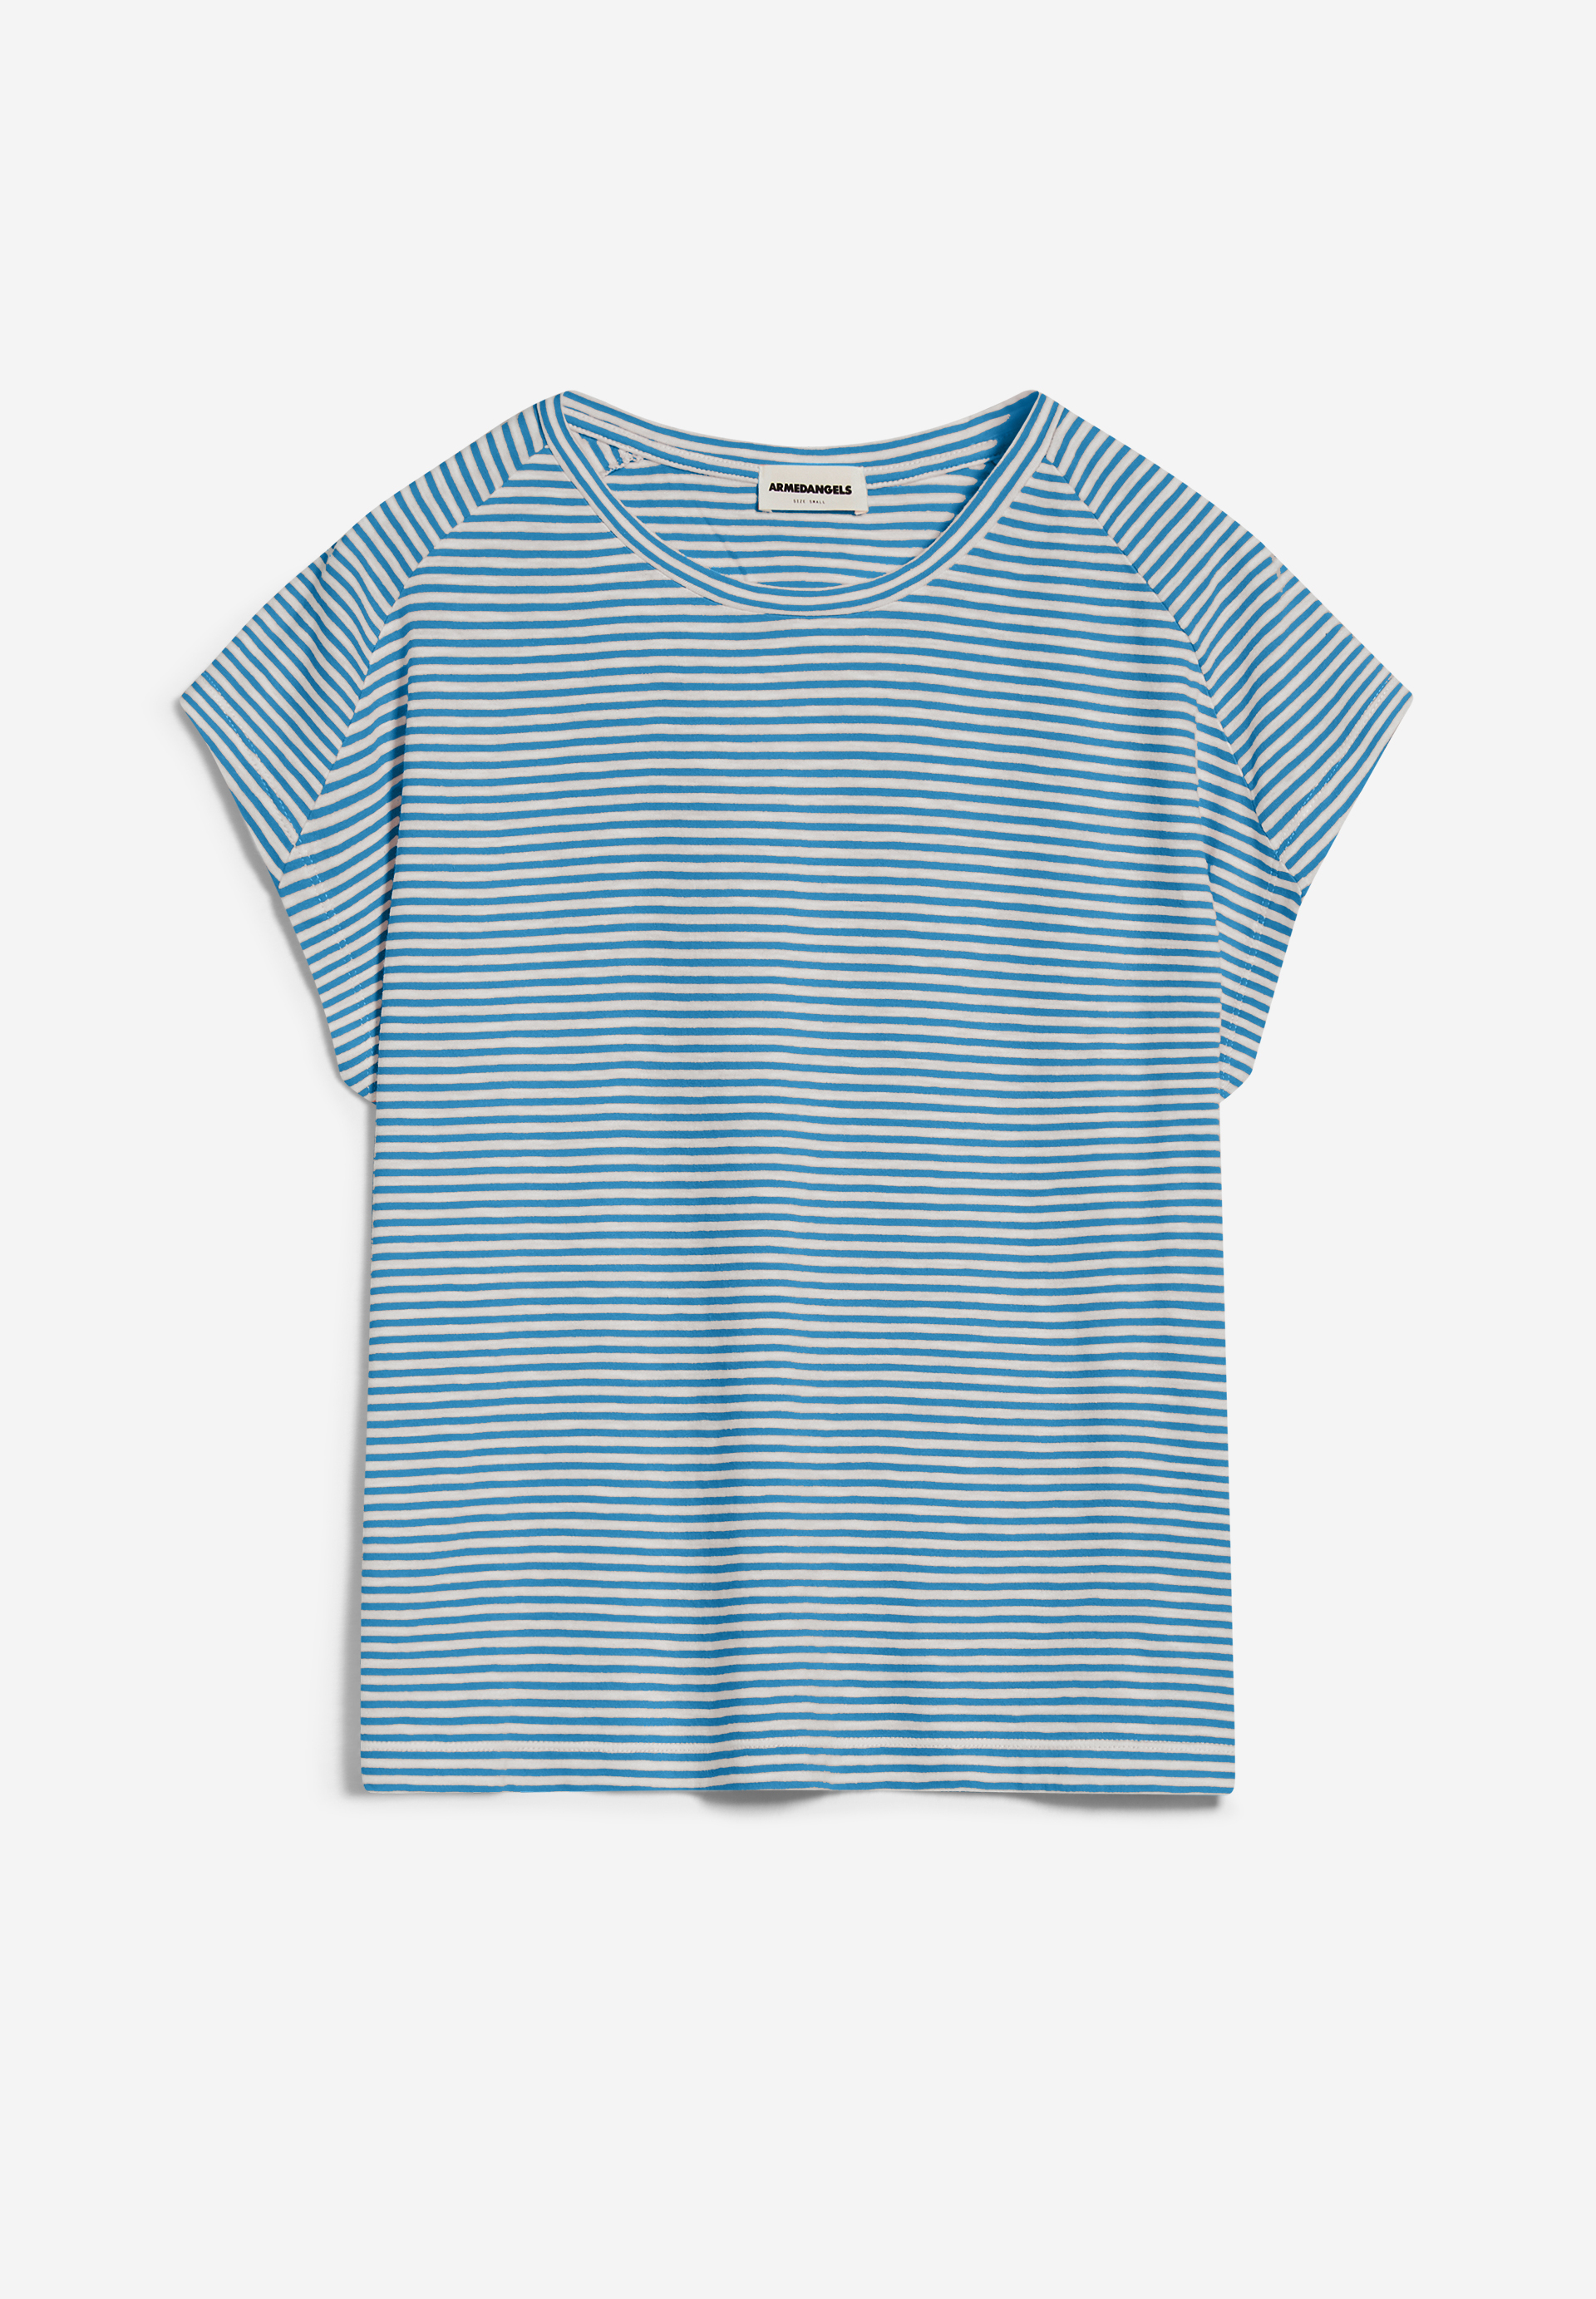 ONELIAA LOVELY STRIPES T-Shirt made of Organic Cotton